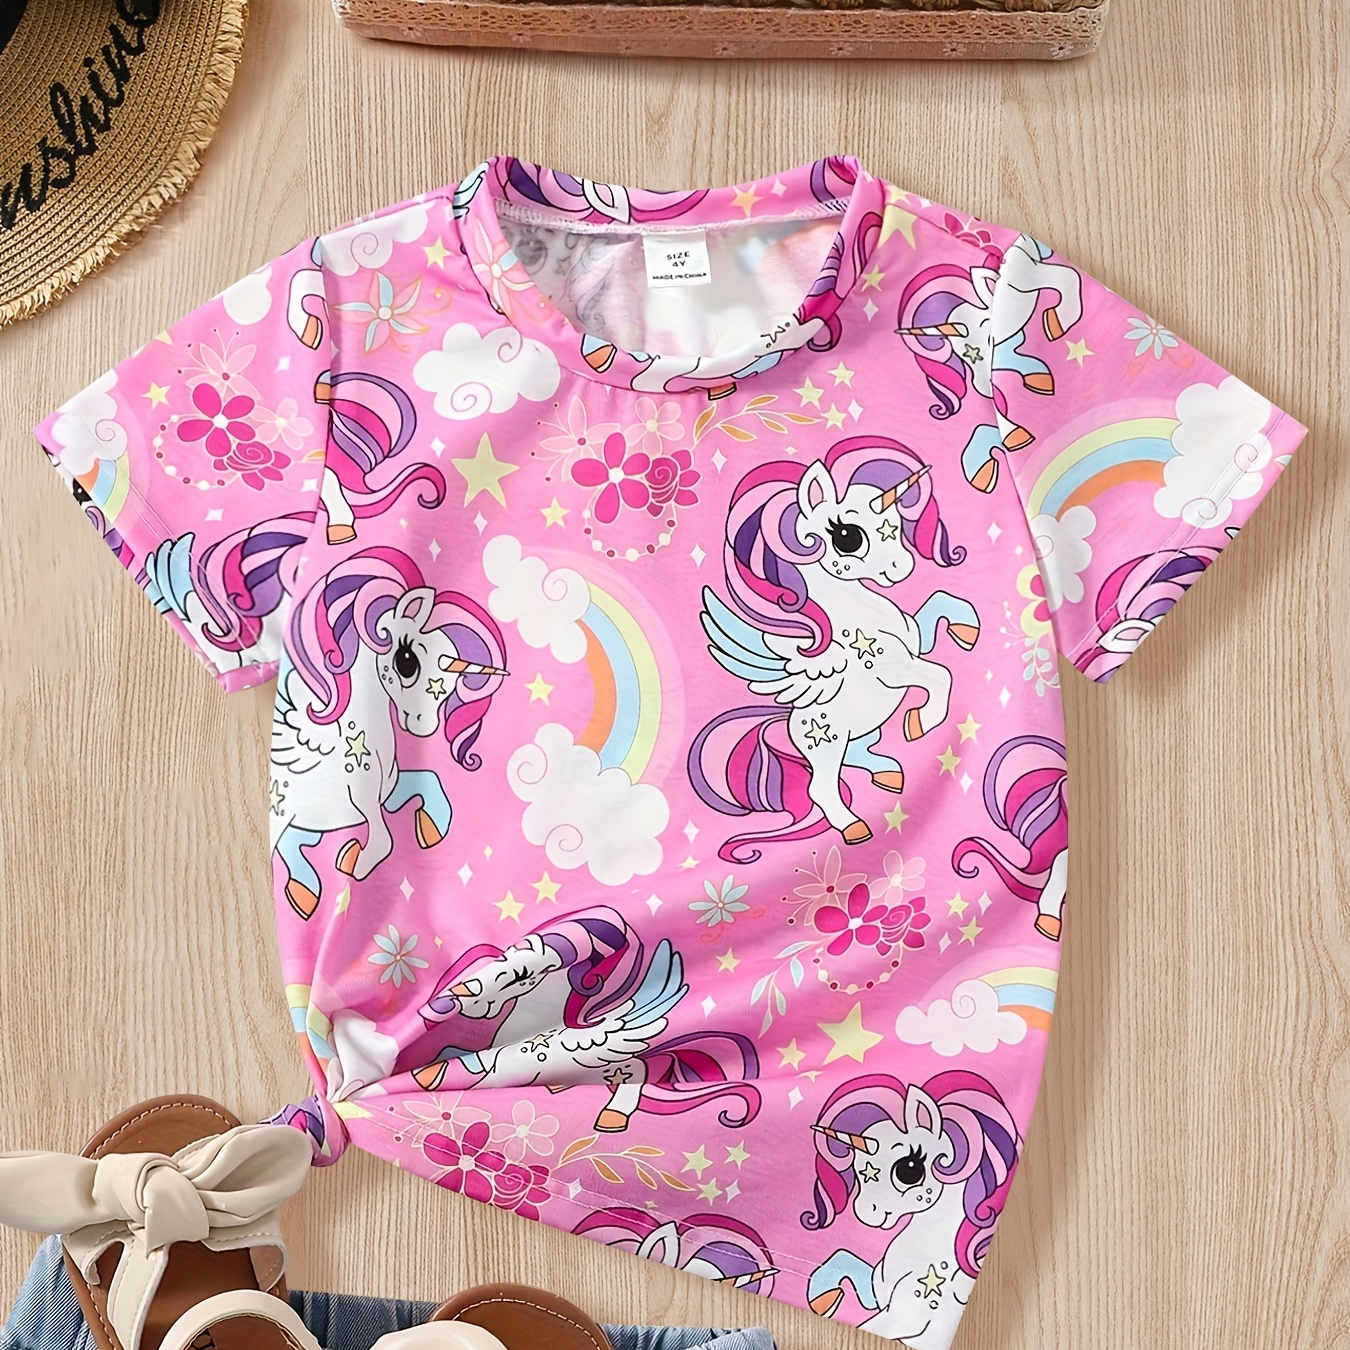 

Girls Unicorn Pony Allover Print Short Sleeve T Shirt Casual Round Neck Summer Tops Tee For Kids